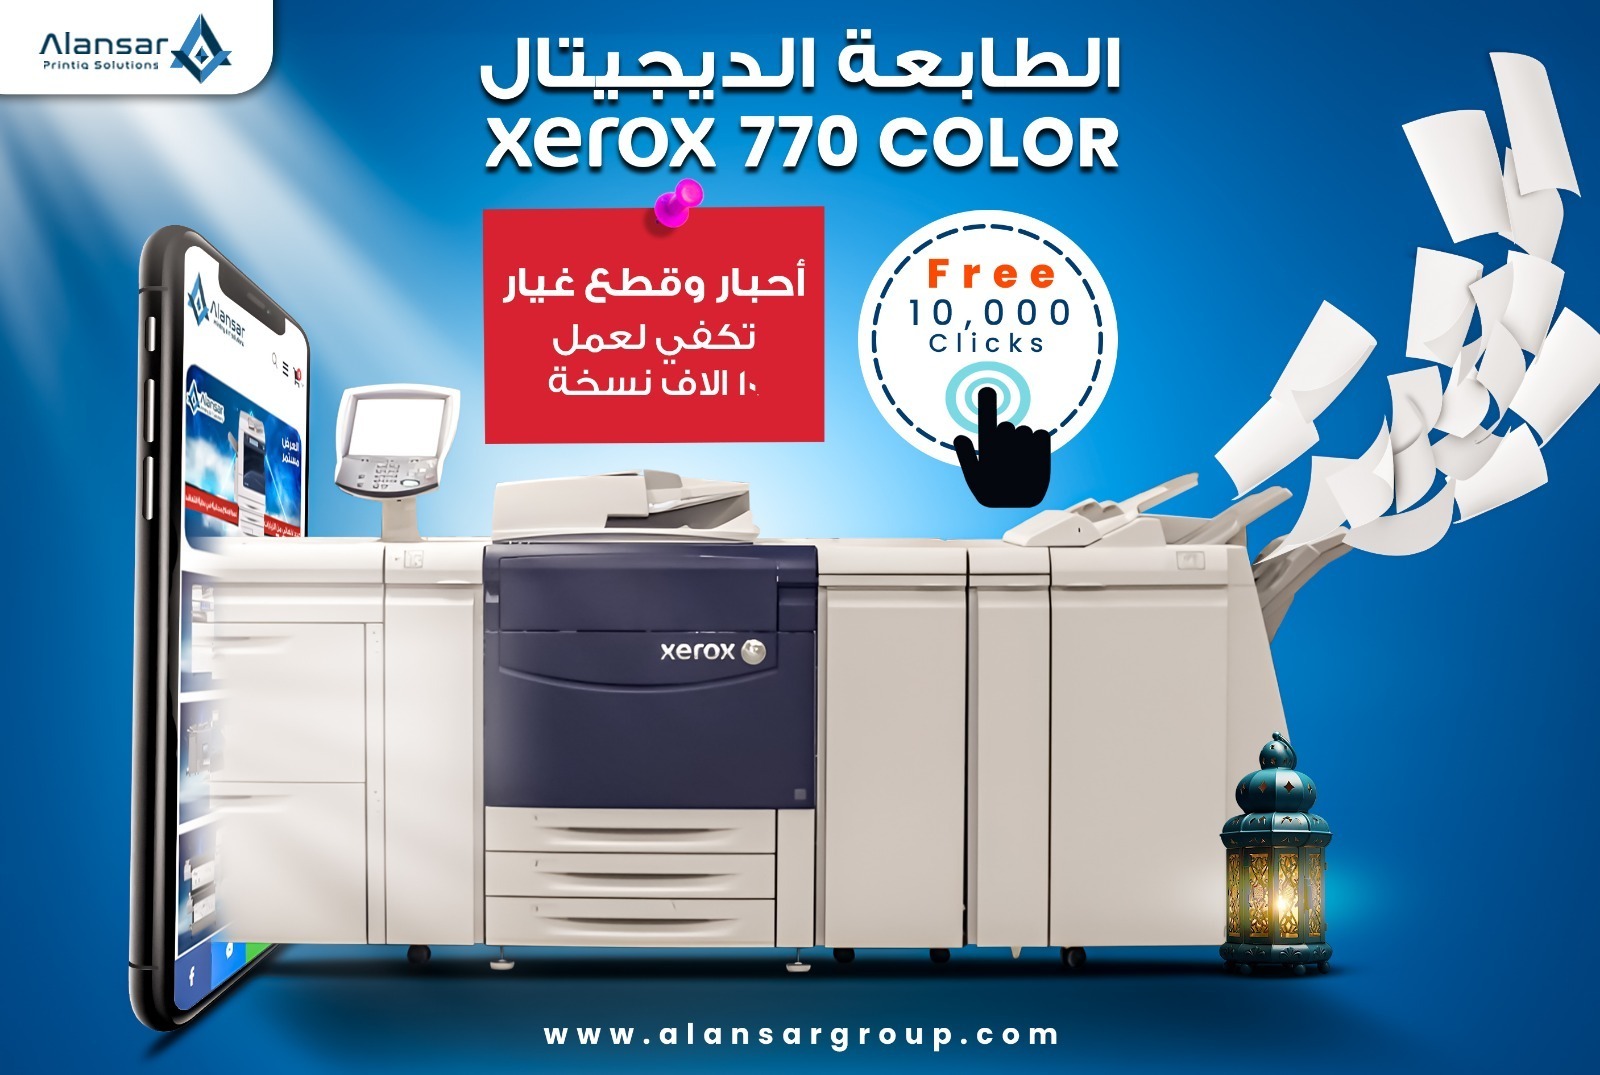 Save 80 thousand pounds with Xerox digital printer offer